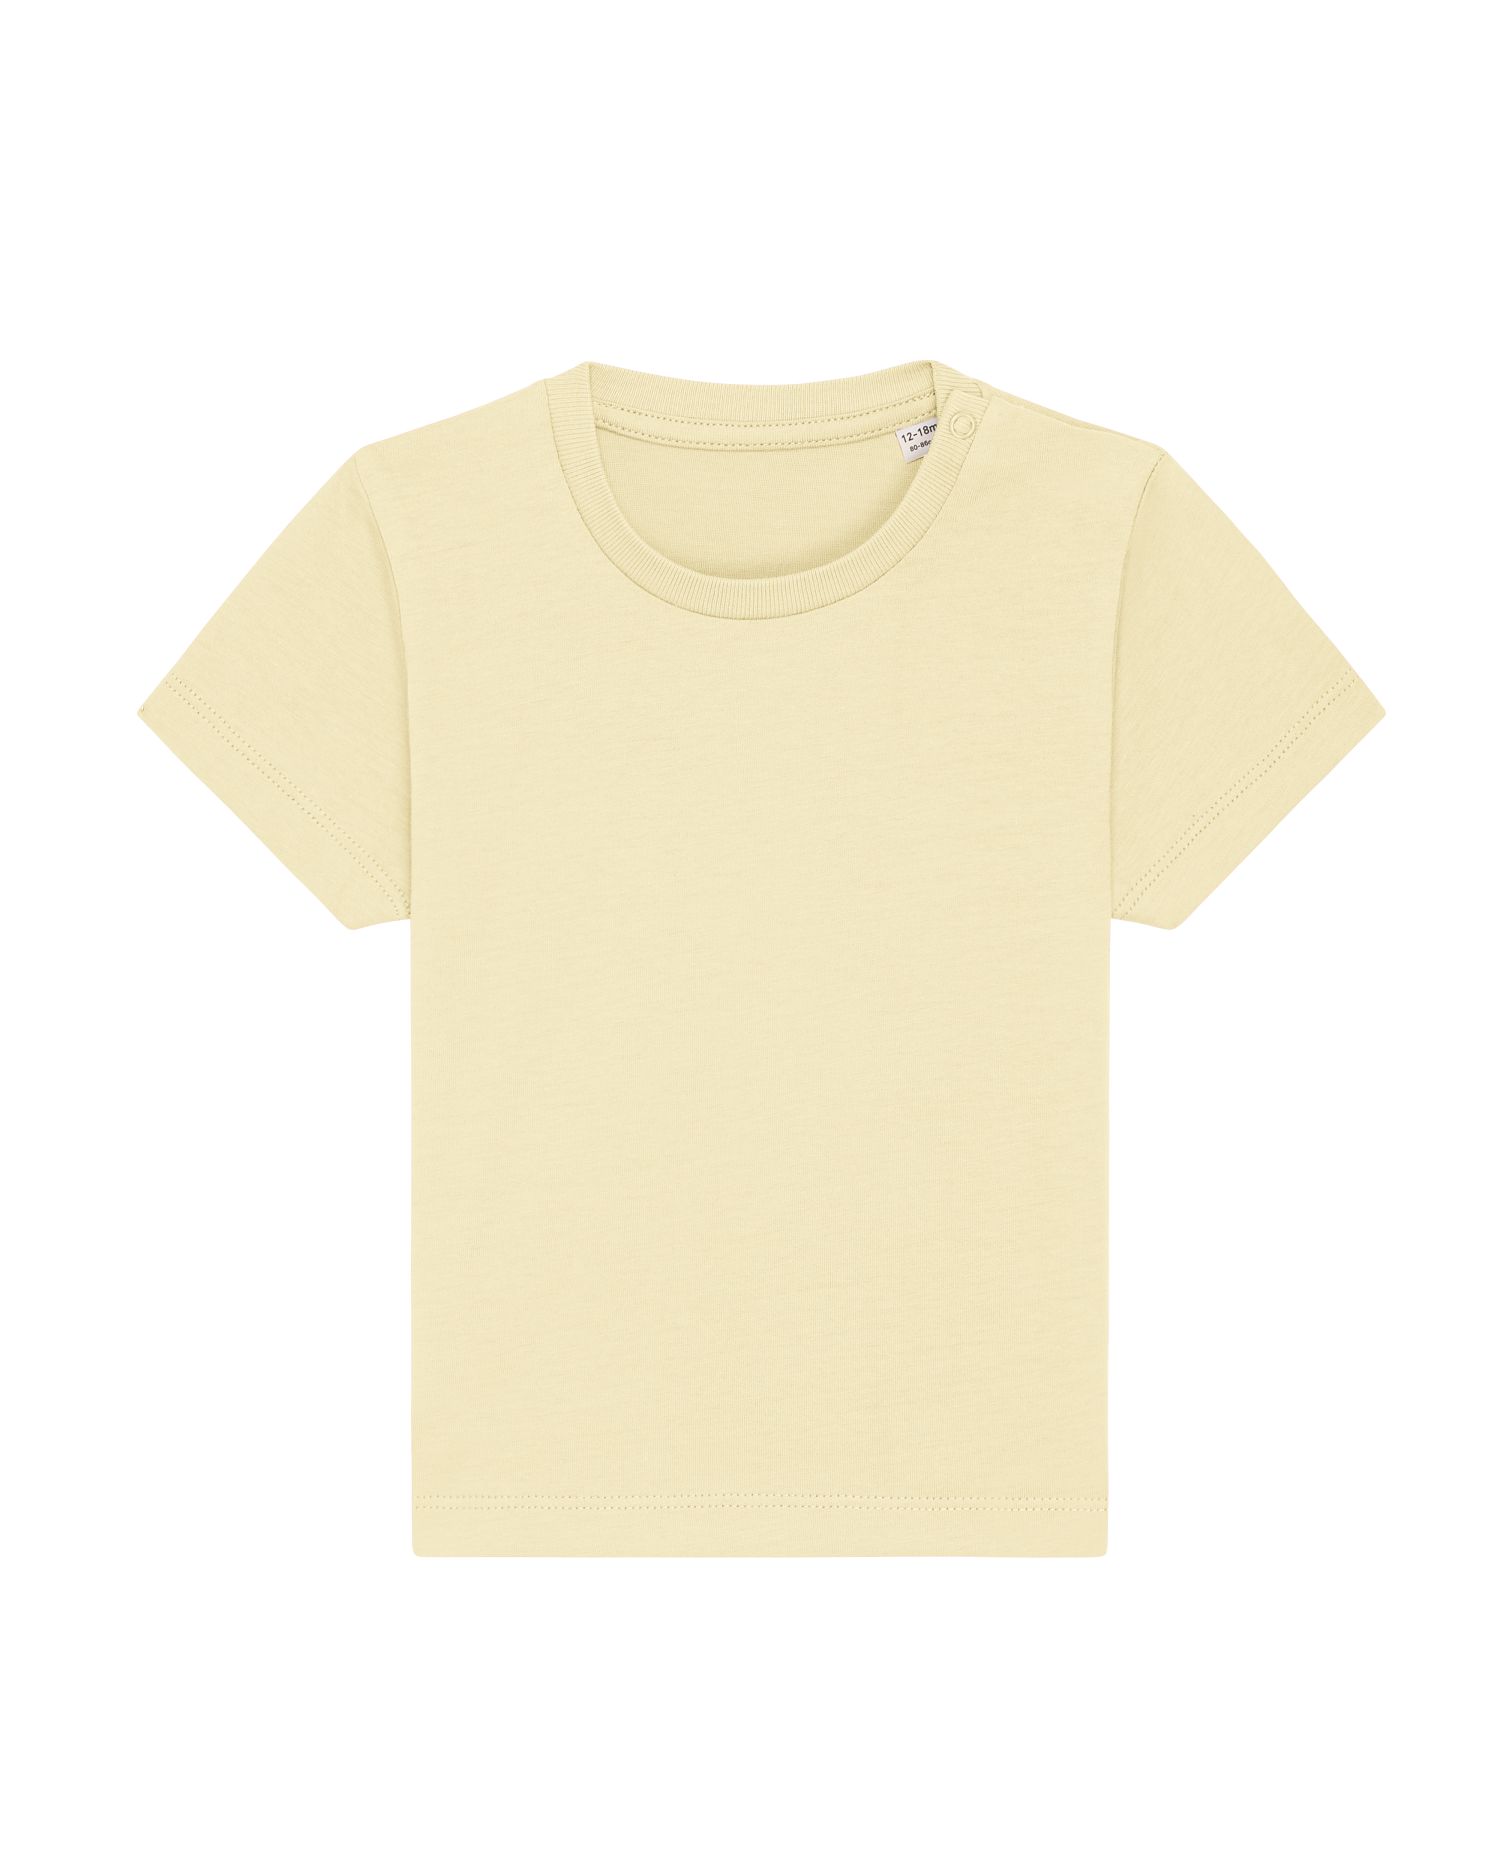 T-Shirt Baby Creator in Farbe Butter